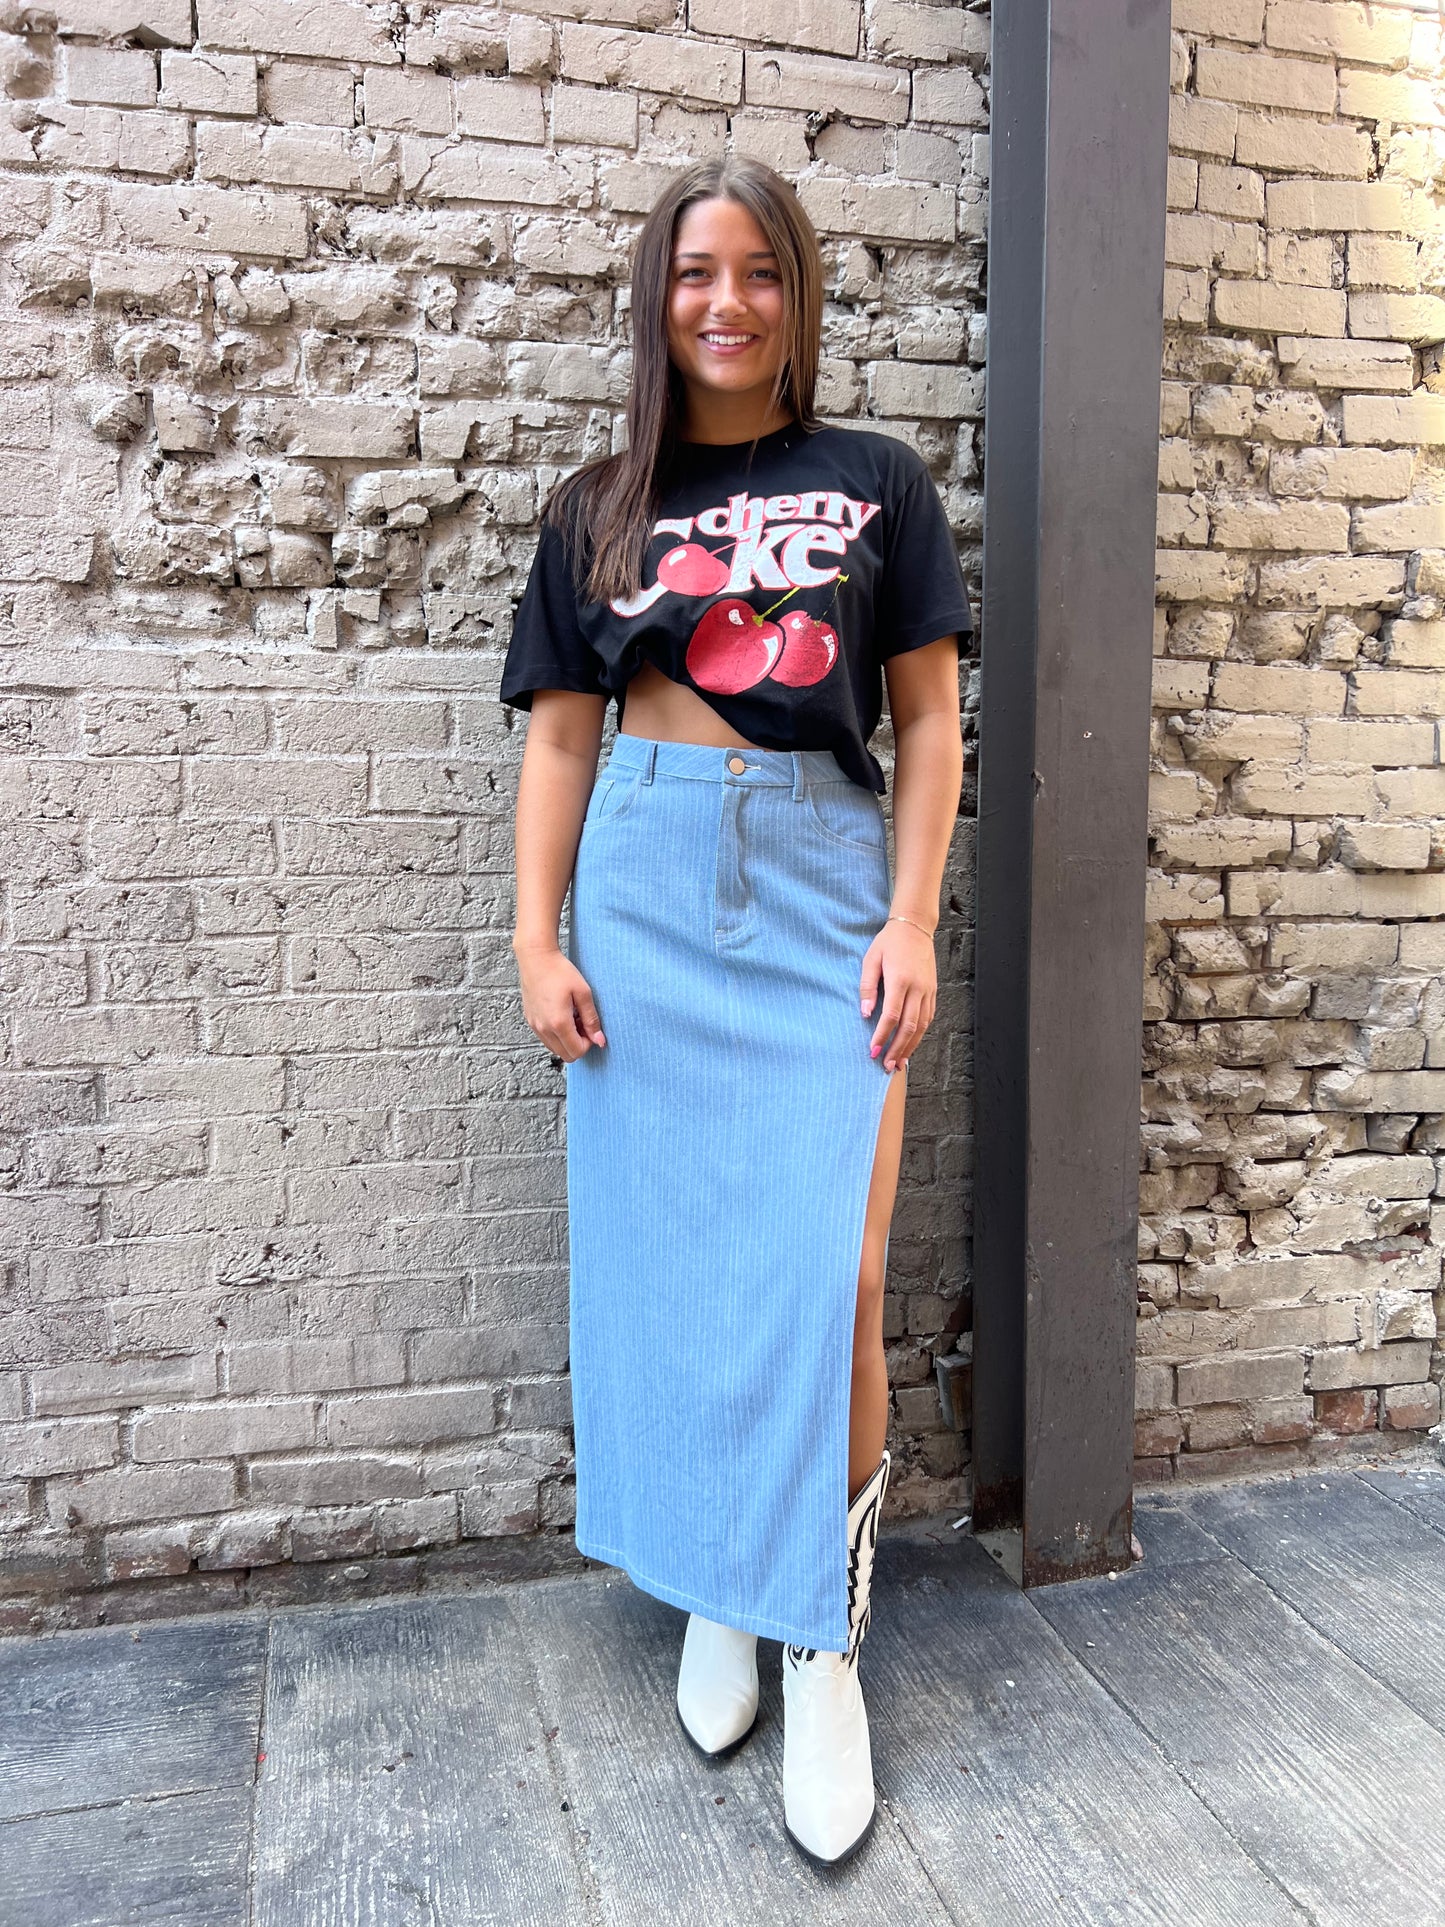 graphic tee and denim skirt outfits